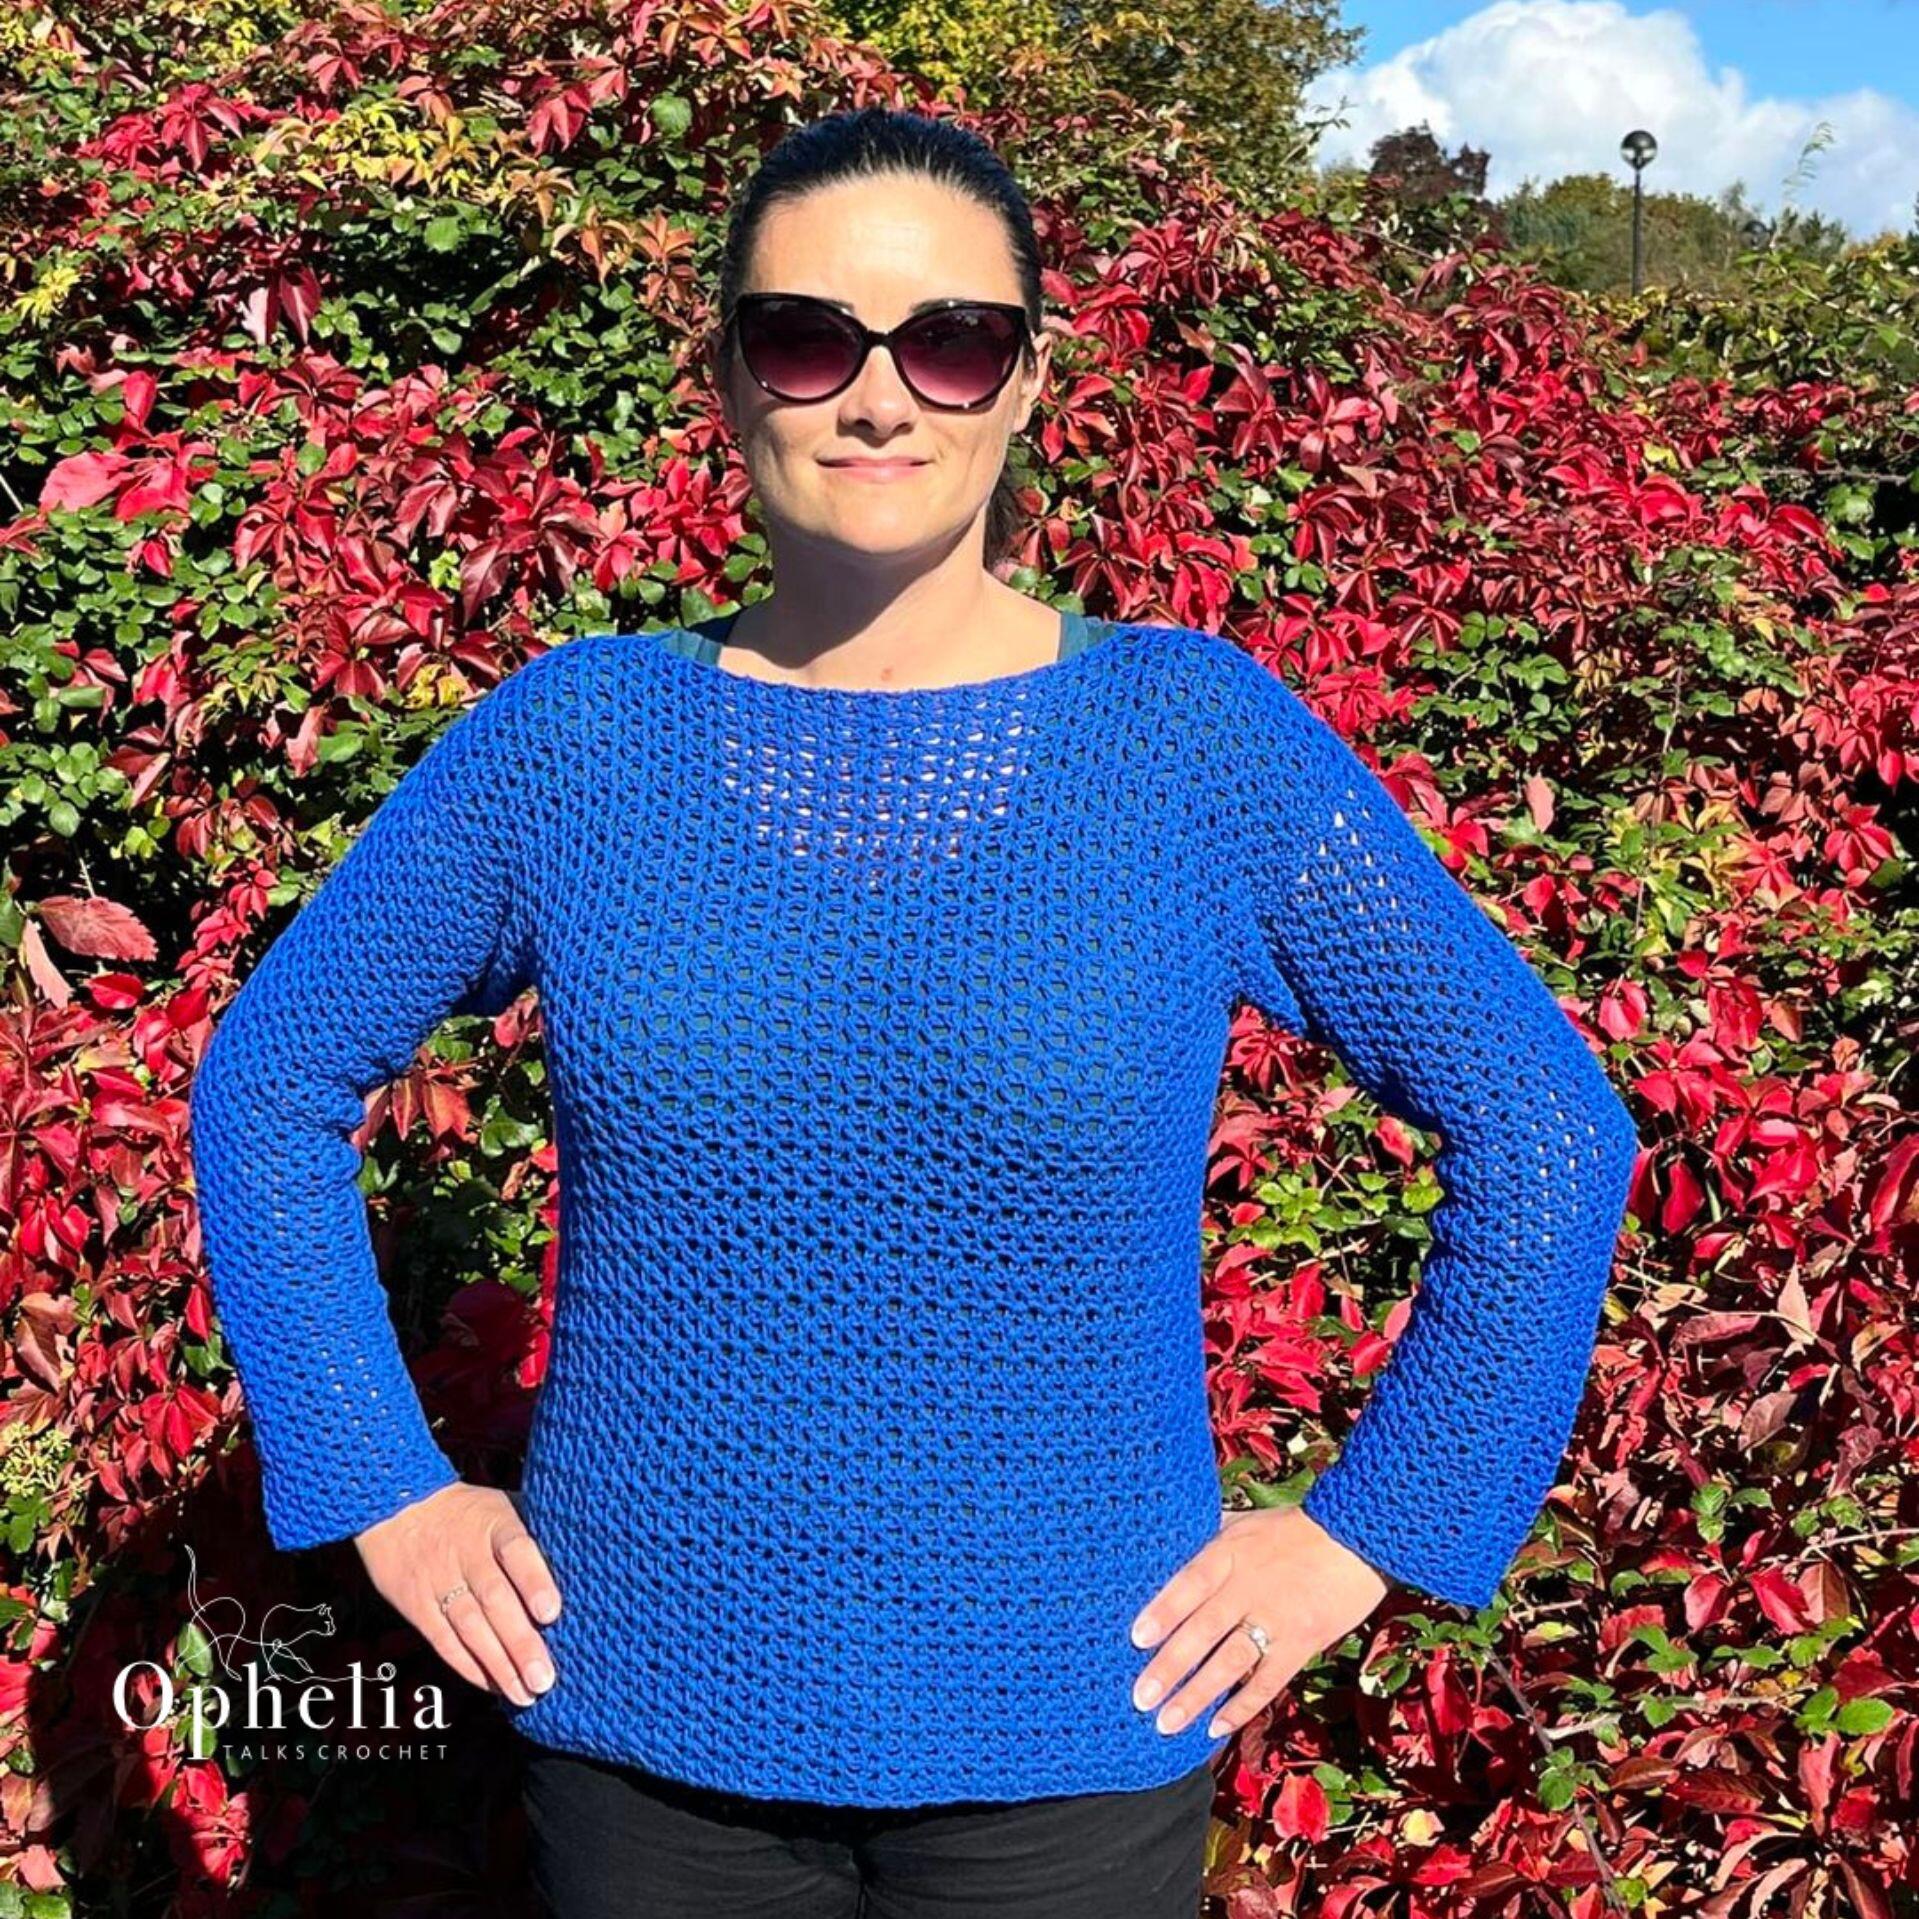 Emma wearing the simple crochet sweater in Wendy supreme cotton love Royal